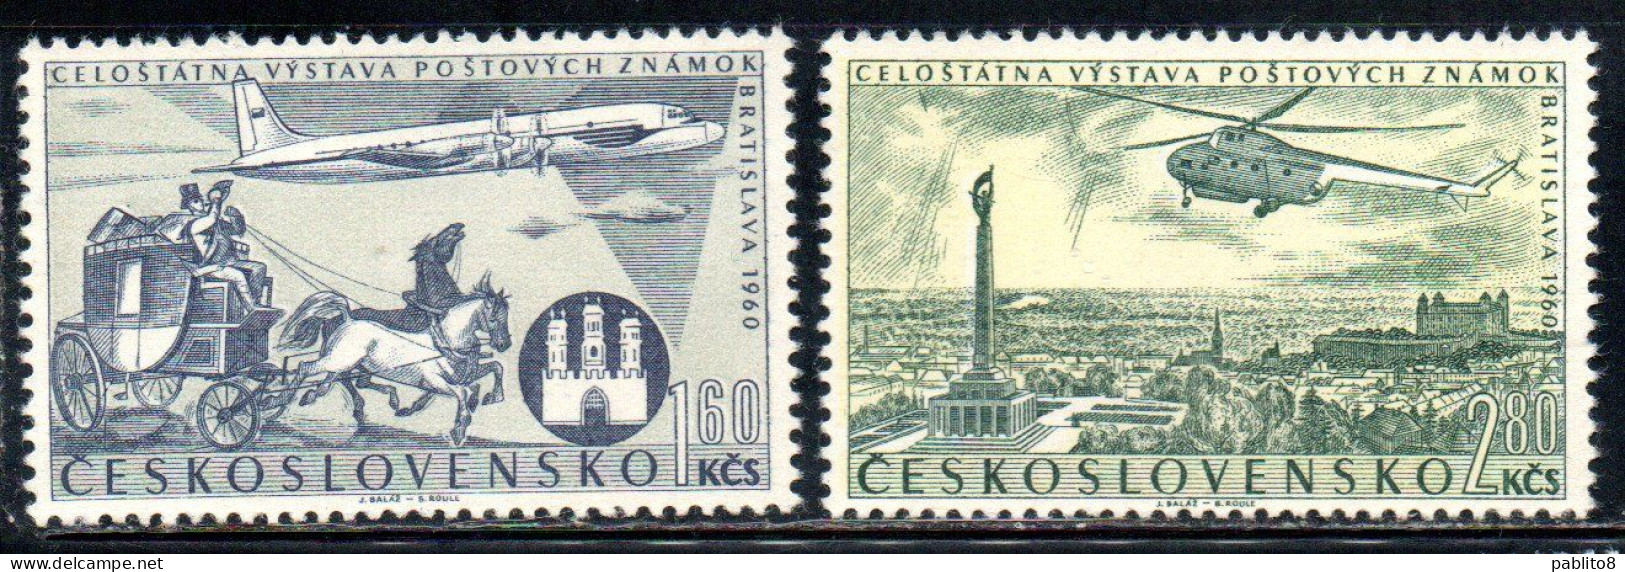 CZECHOSLOVAKIA CECOSLOVACCHIA 1960 AIR POST MAIL AIRMAIL NATIONAL STAMP EXHIBITION COMPLETE SET SERIE COMPLETA MNH - Luftpost